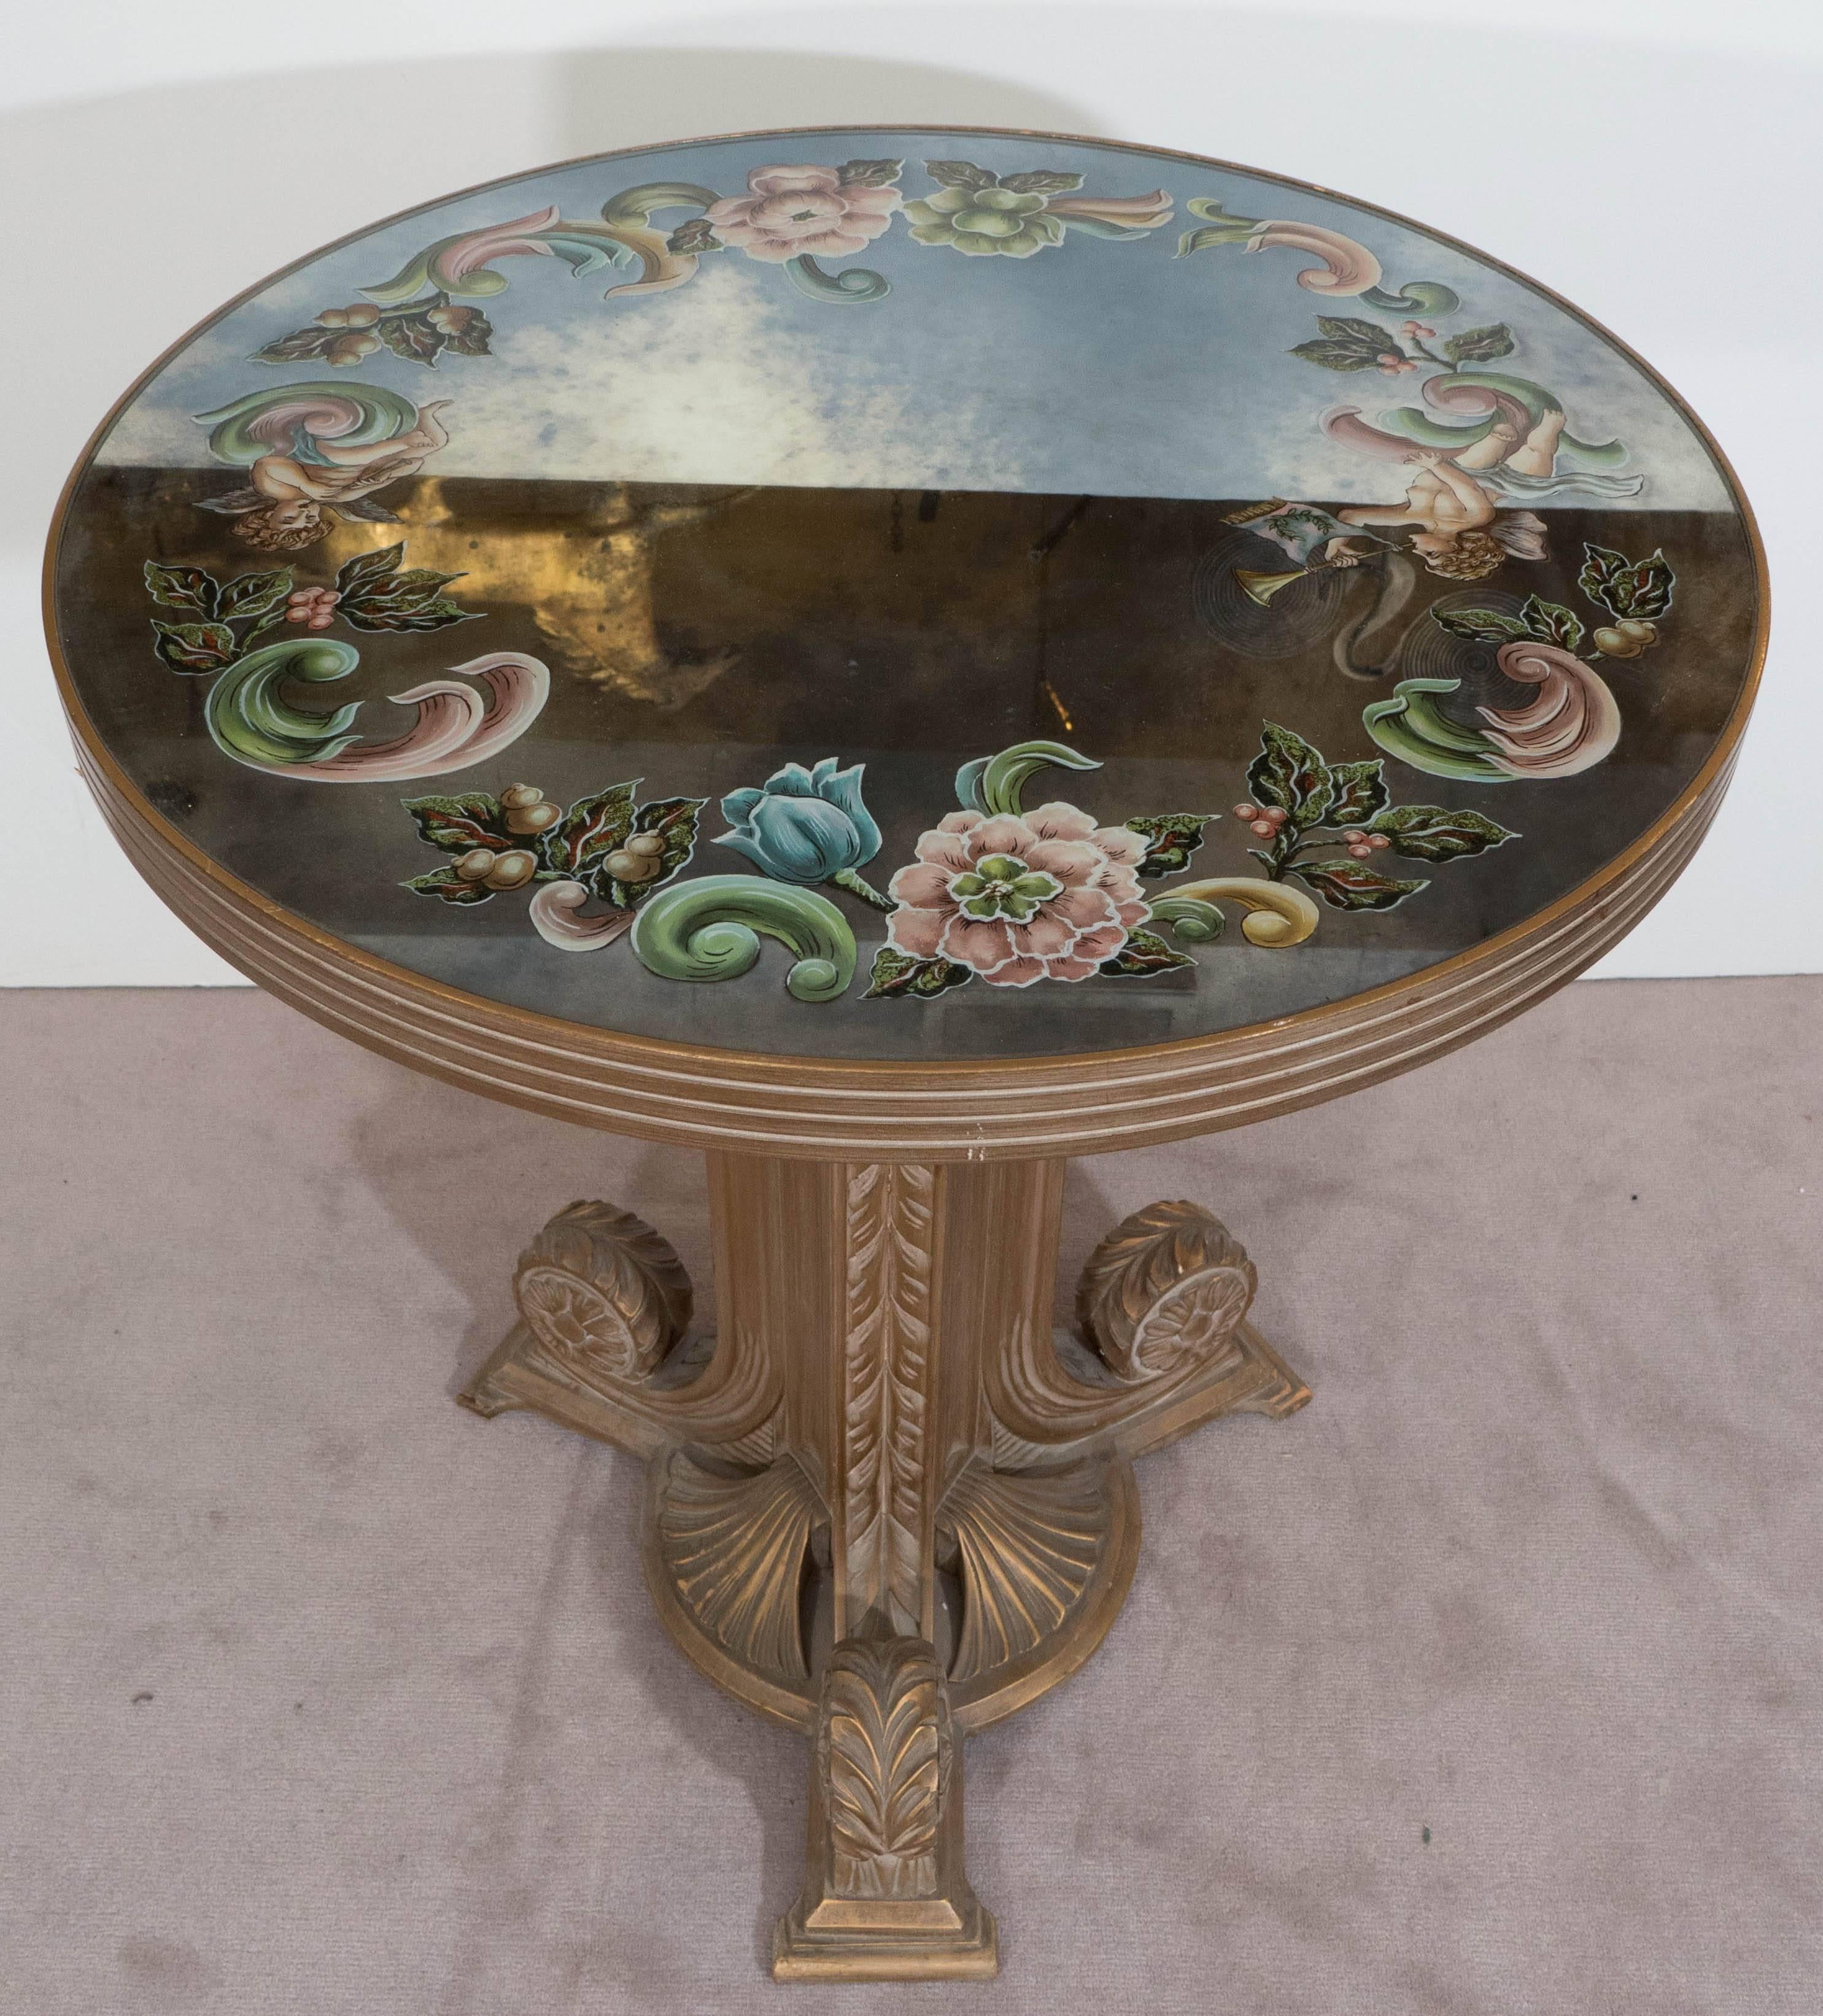 Gilt Pair of Grosfeld House Gueridon Tables with Reverse Painted Mirrored Tops